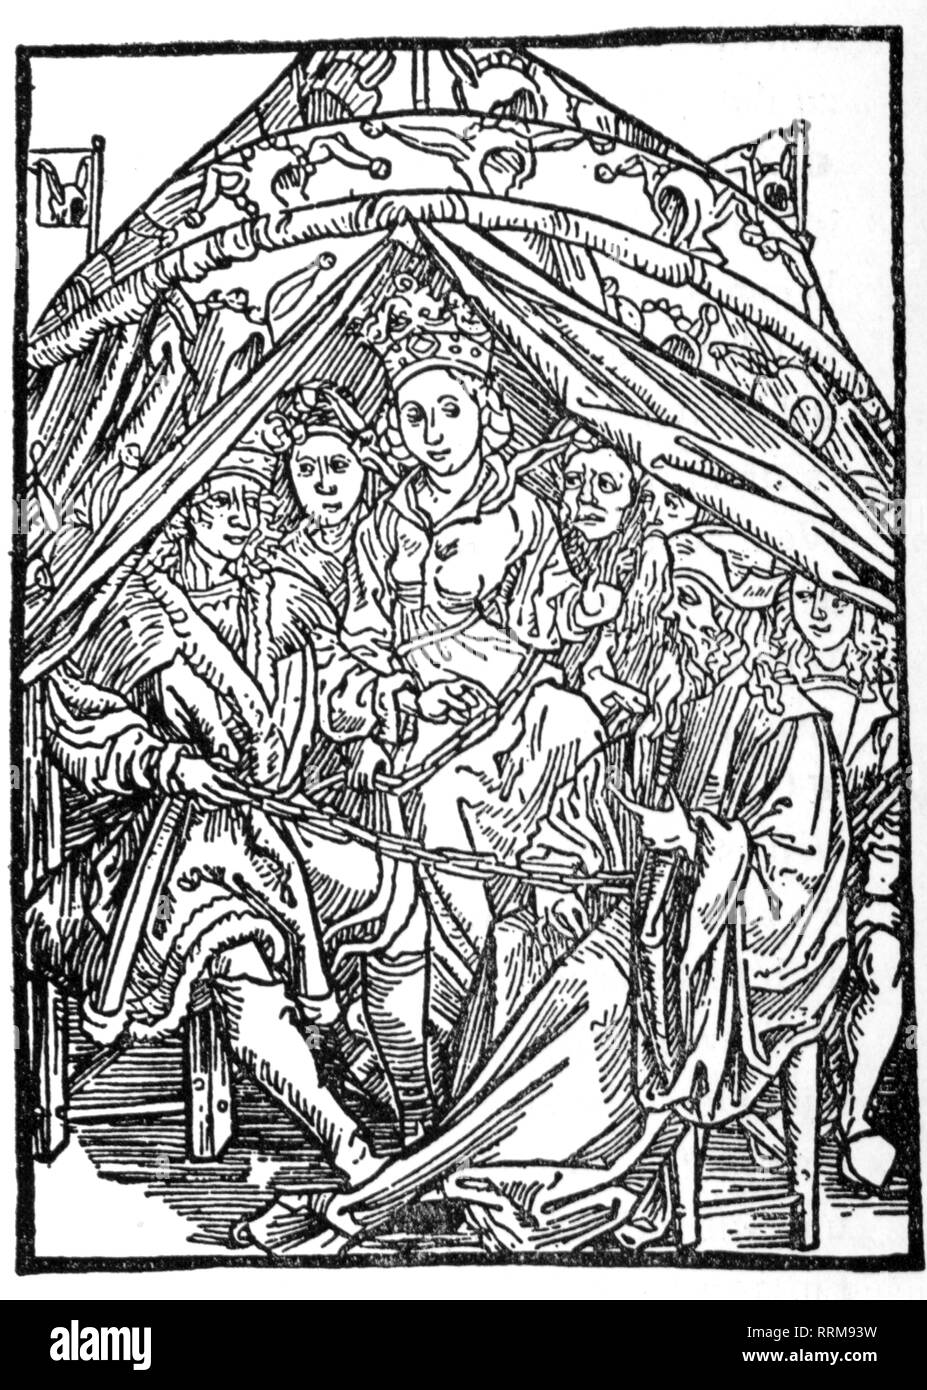 Brant, Sebastian, 1457/1458 - 10.5.1521, German humanist and author / writer, works, 'The Ship of Fools', printed by Johann Bergmann von Olpe, Basel, 1494, woodcut to the 46th chapter, 'Of the Fools Governance', Additional-Rights-Clearance-Info-Not-Available Stock Photo